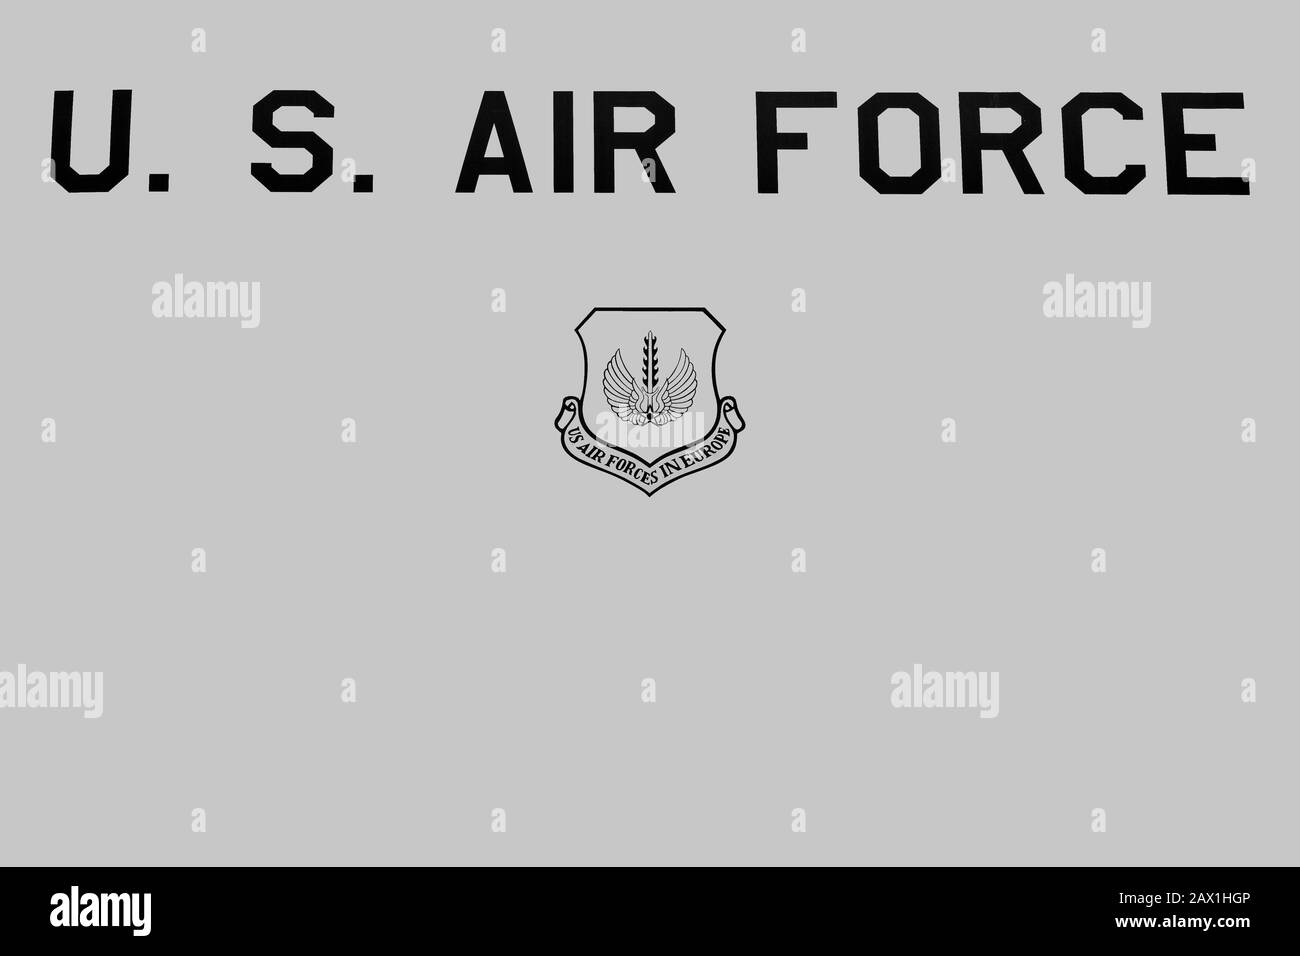 United States Air Force Logos - 194+ Best United States Air Force